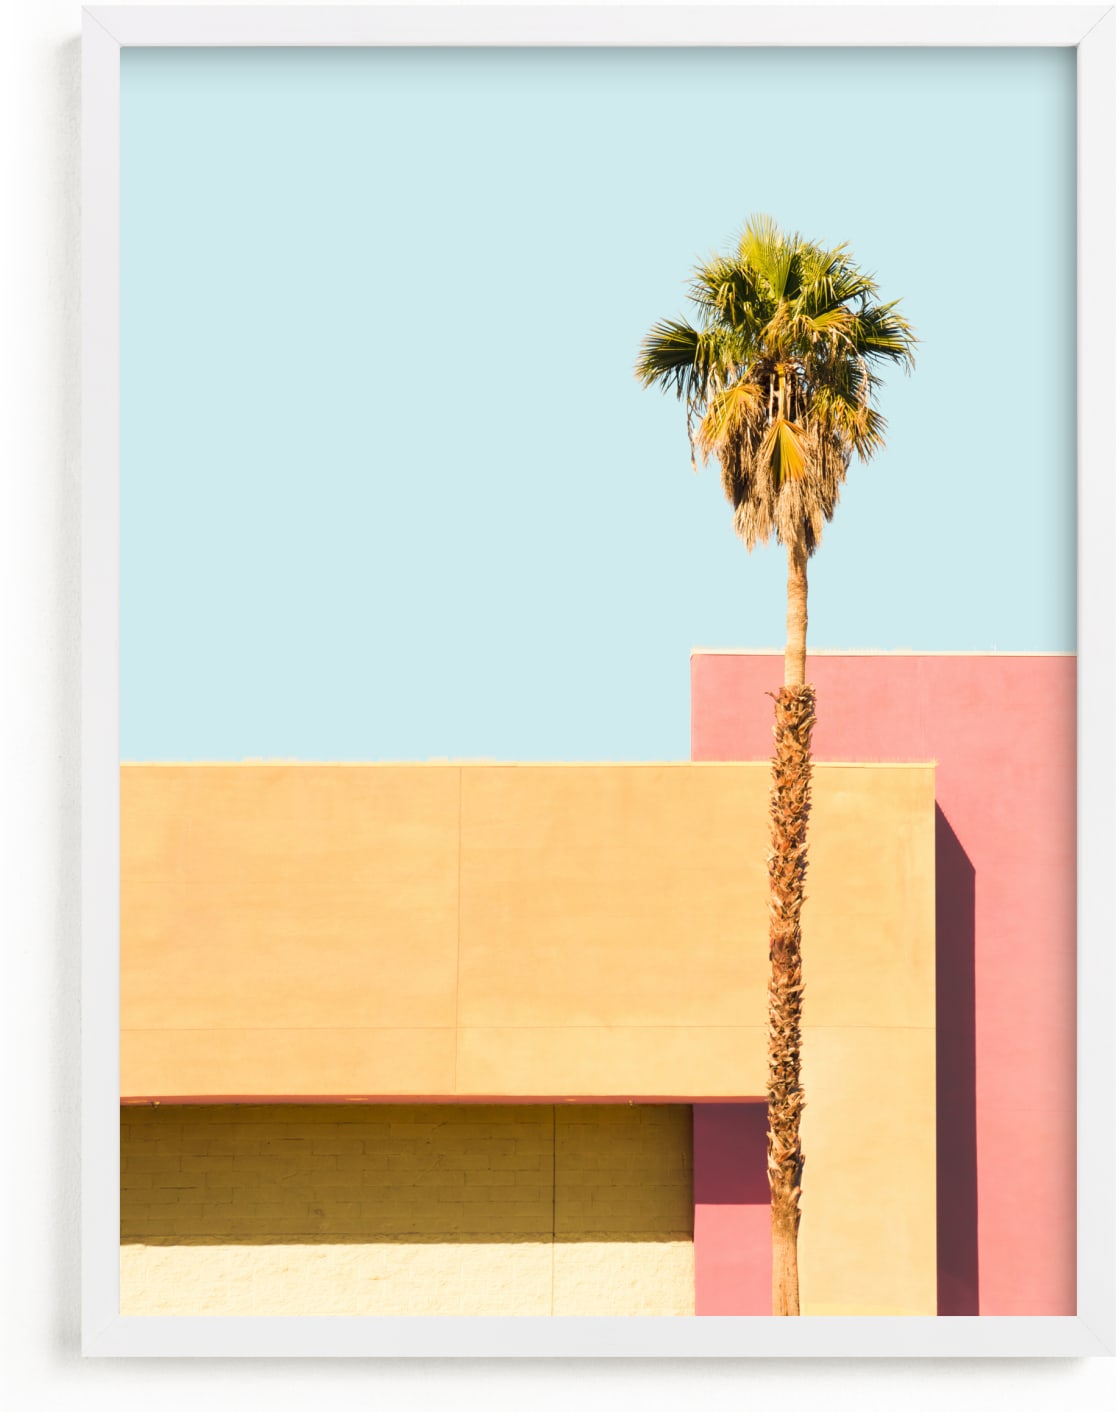 This is a blue, yellow, pink art by Lisa Sundin called Palm Springs - A Color Study II.